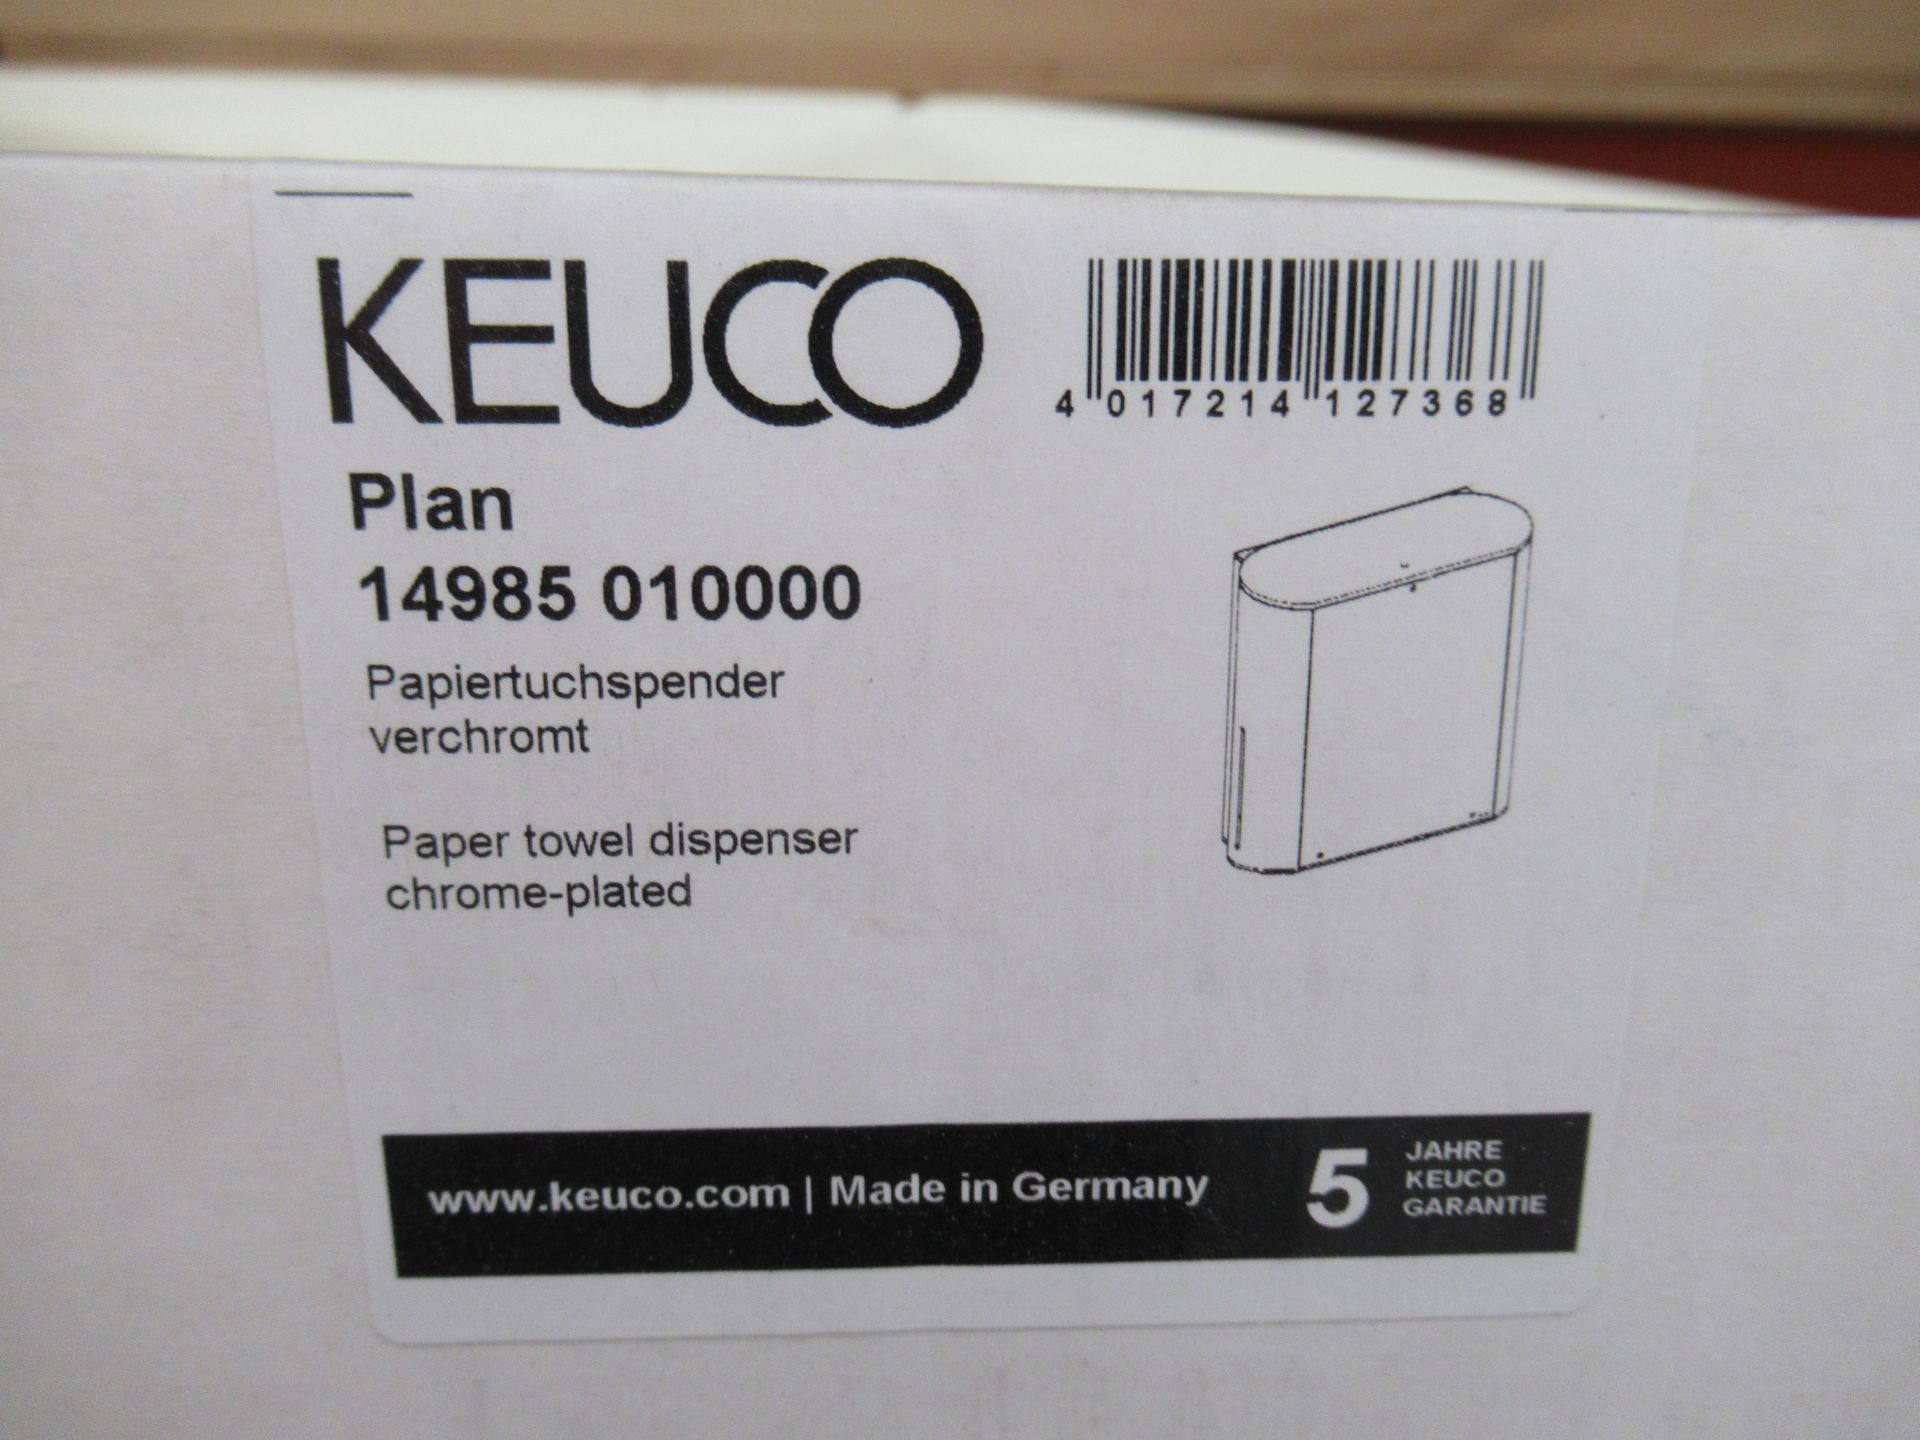 3 x Keuco Plan Paper Towel Dispensers Chrome Plated, P/N 14985-010000 - Image 2 of 2